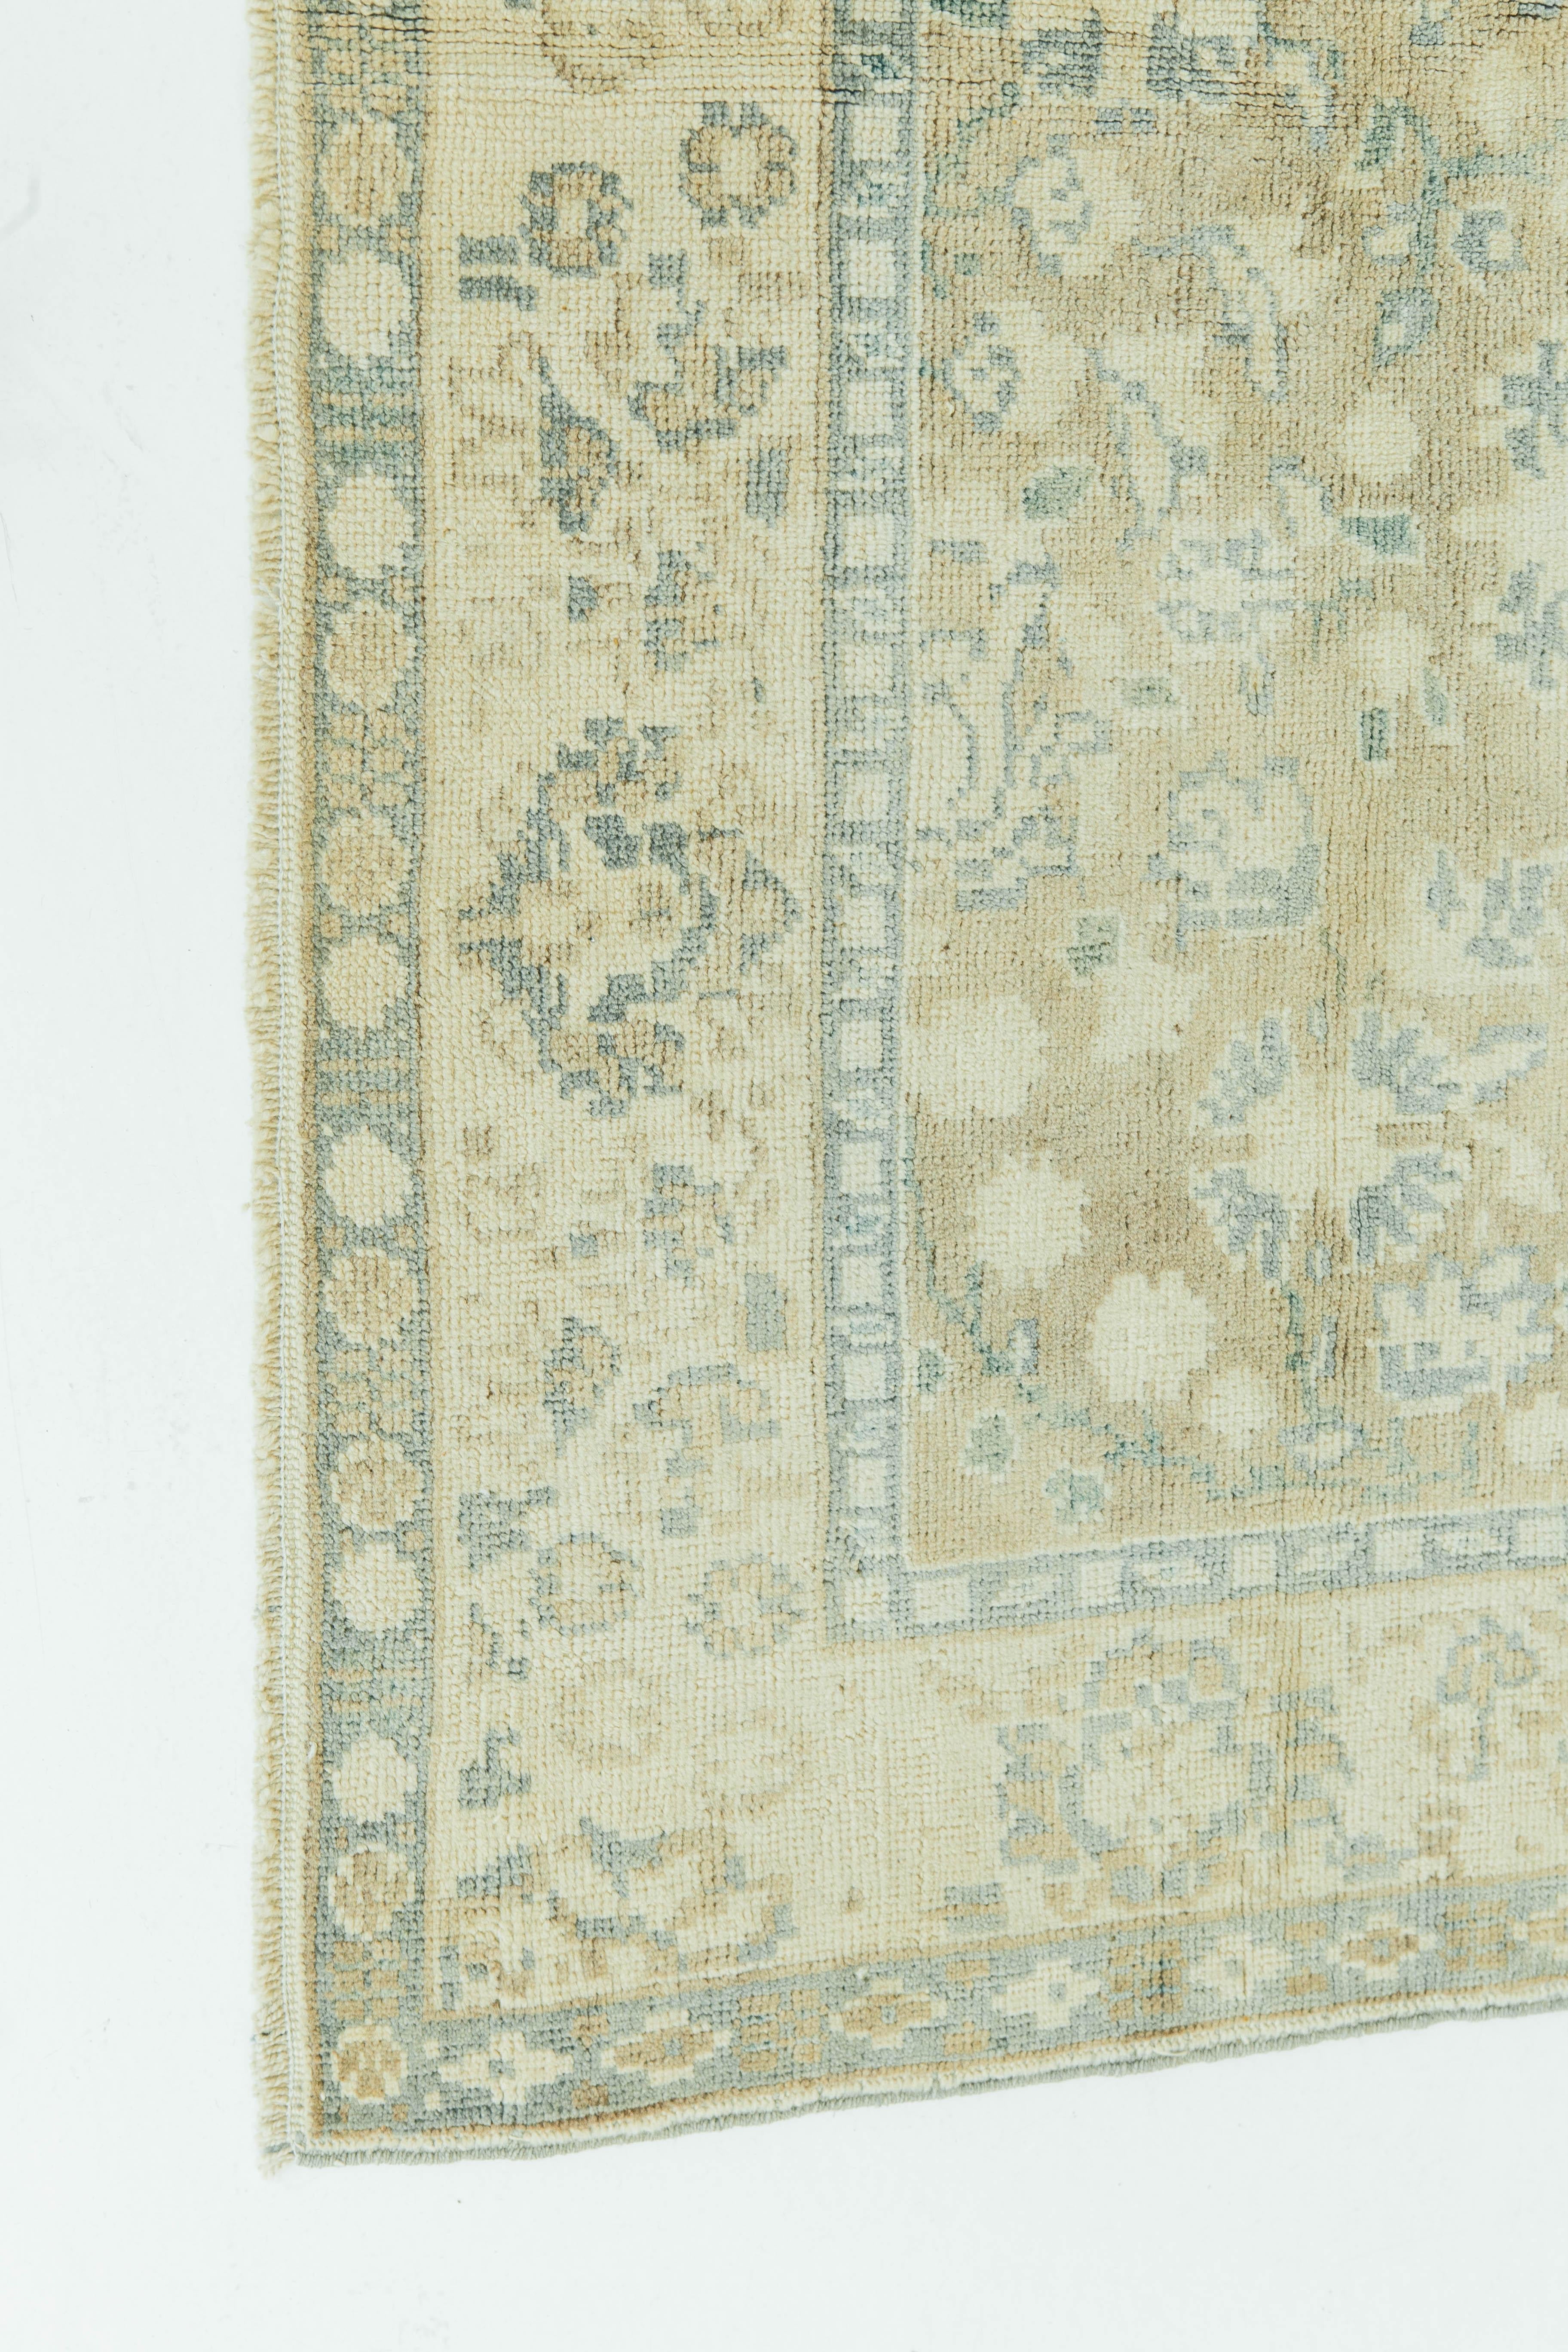 Vintage Turkish Anatolian rugs weave together dyes and colors, motifs, textures and techniques that are popular in Anatolia or Asia Minor. This Anatolian piece uses symmetry and geometric floral detailing to perfection. Colors of this antique piece